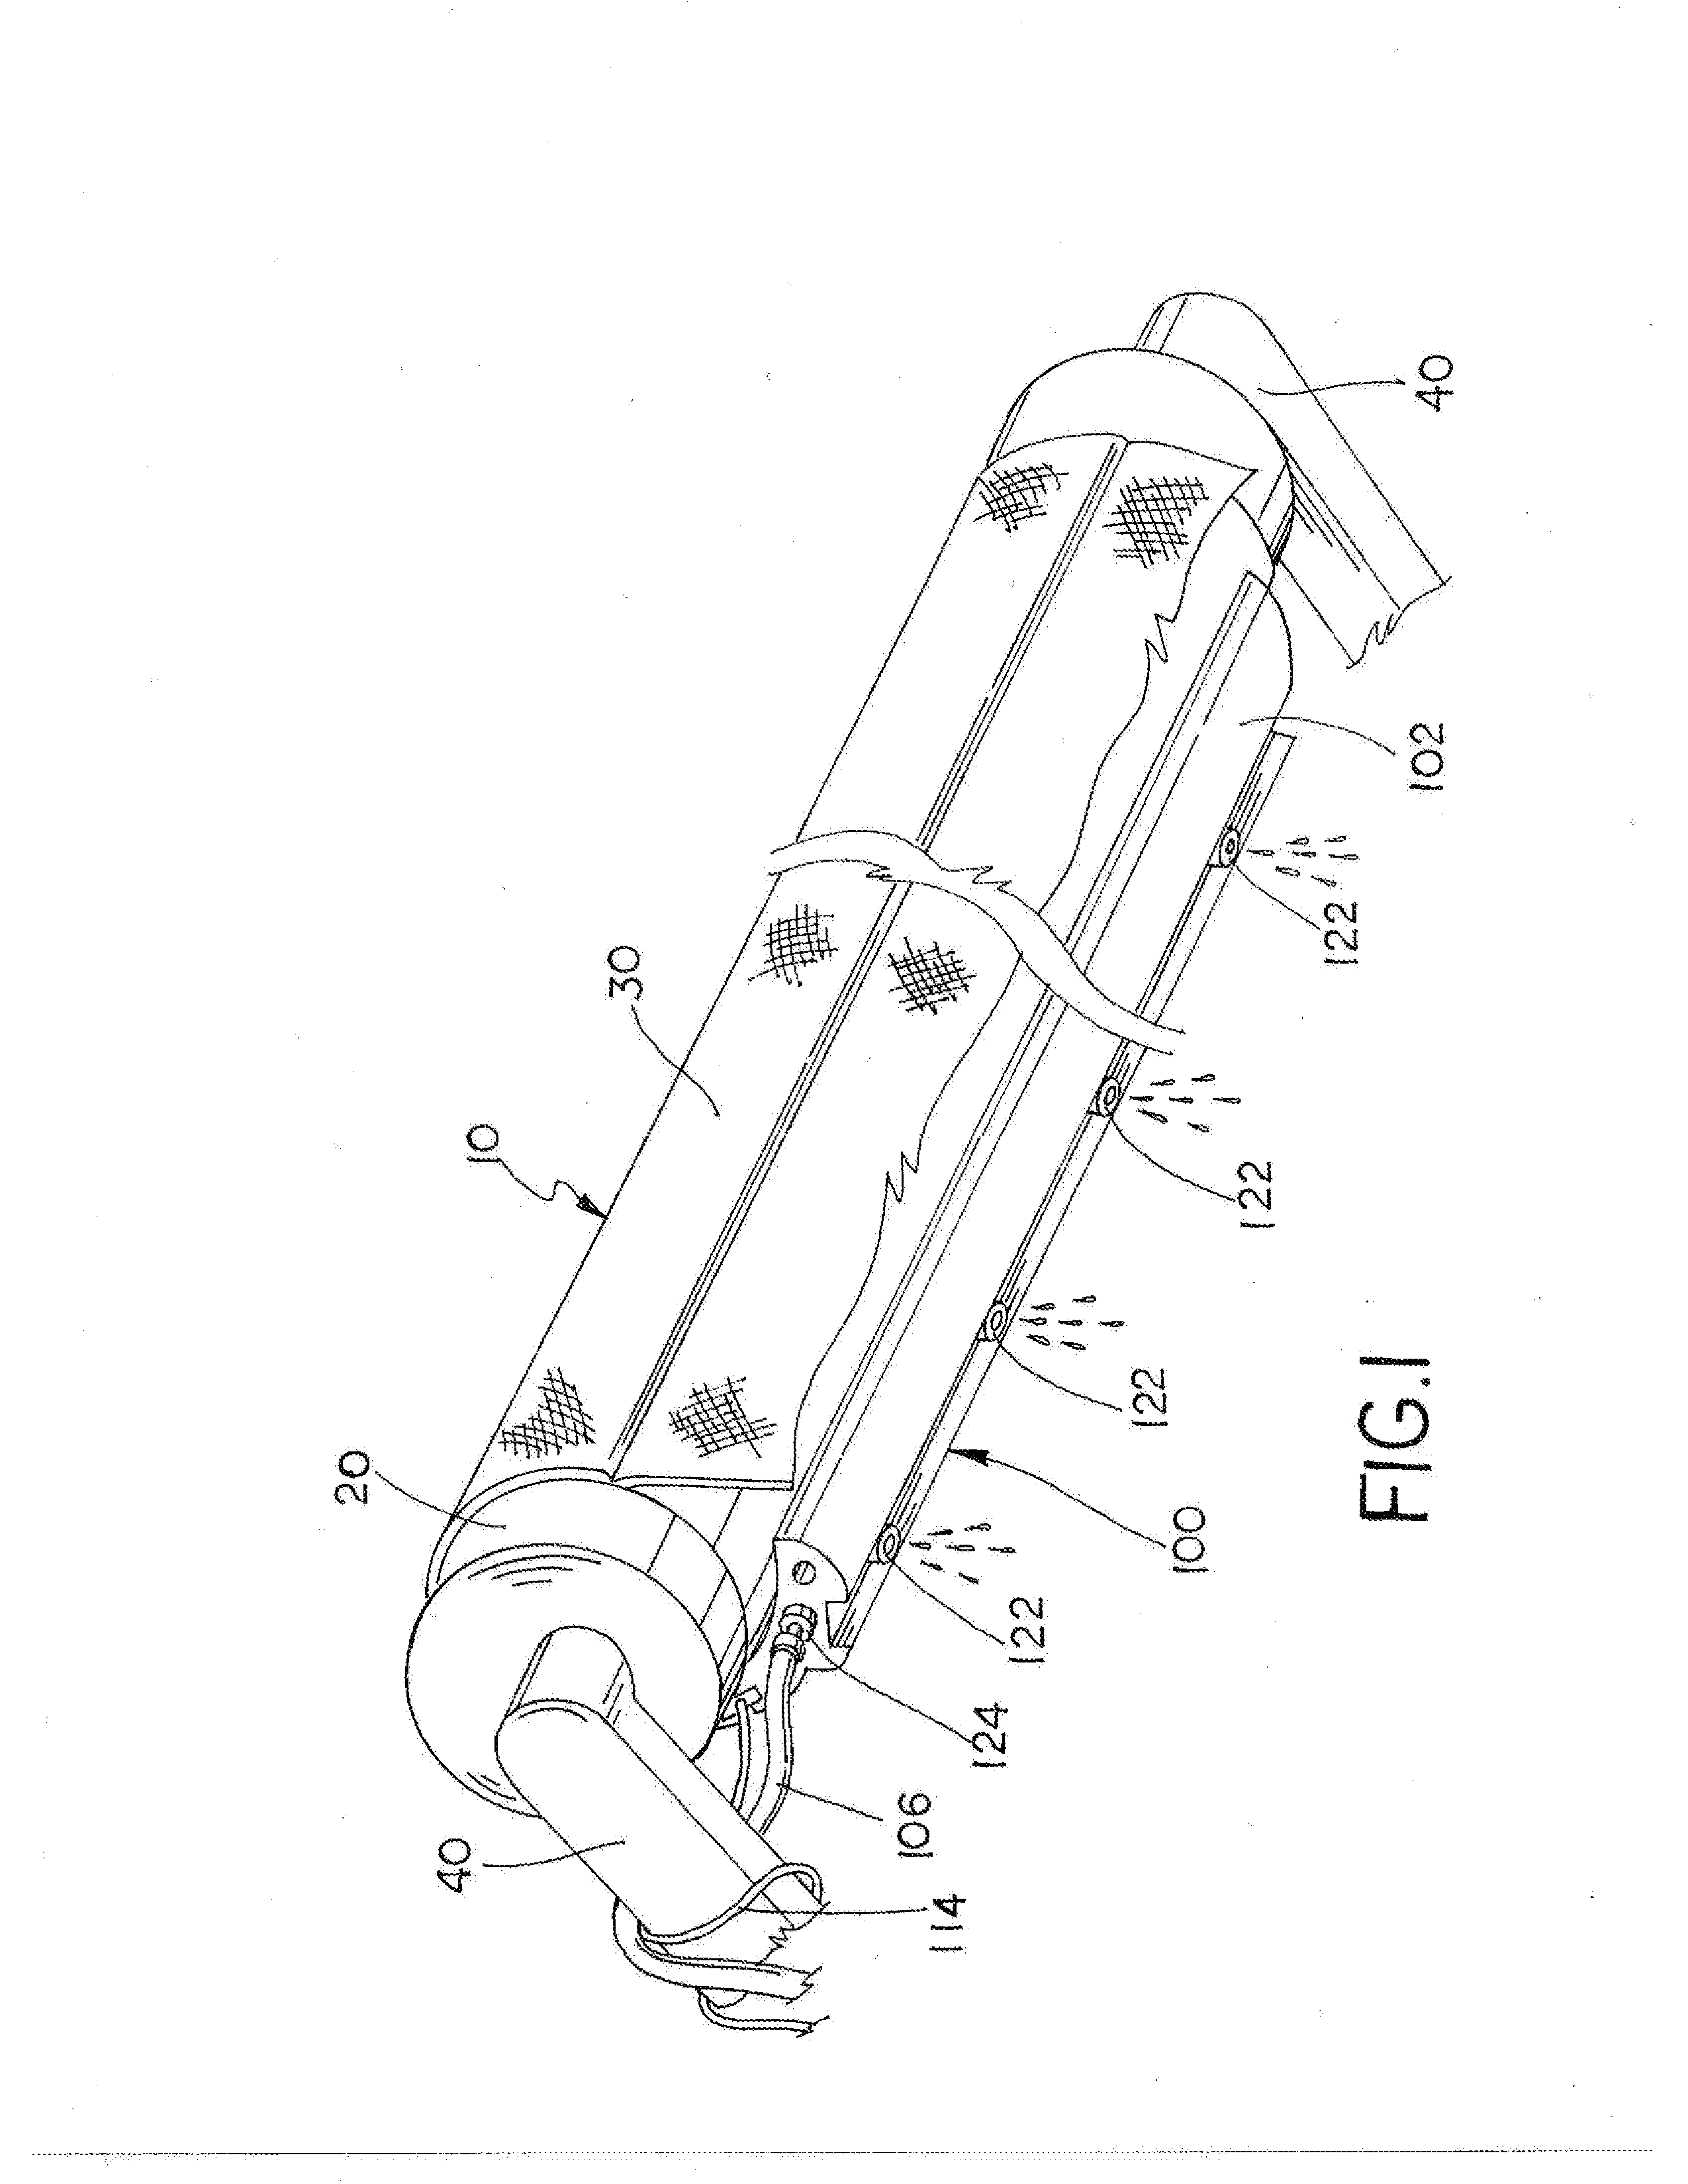 Awning roll attachment with illumination and mist